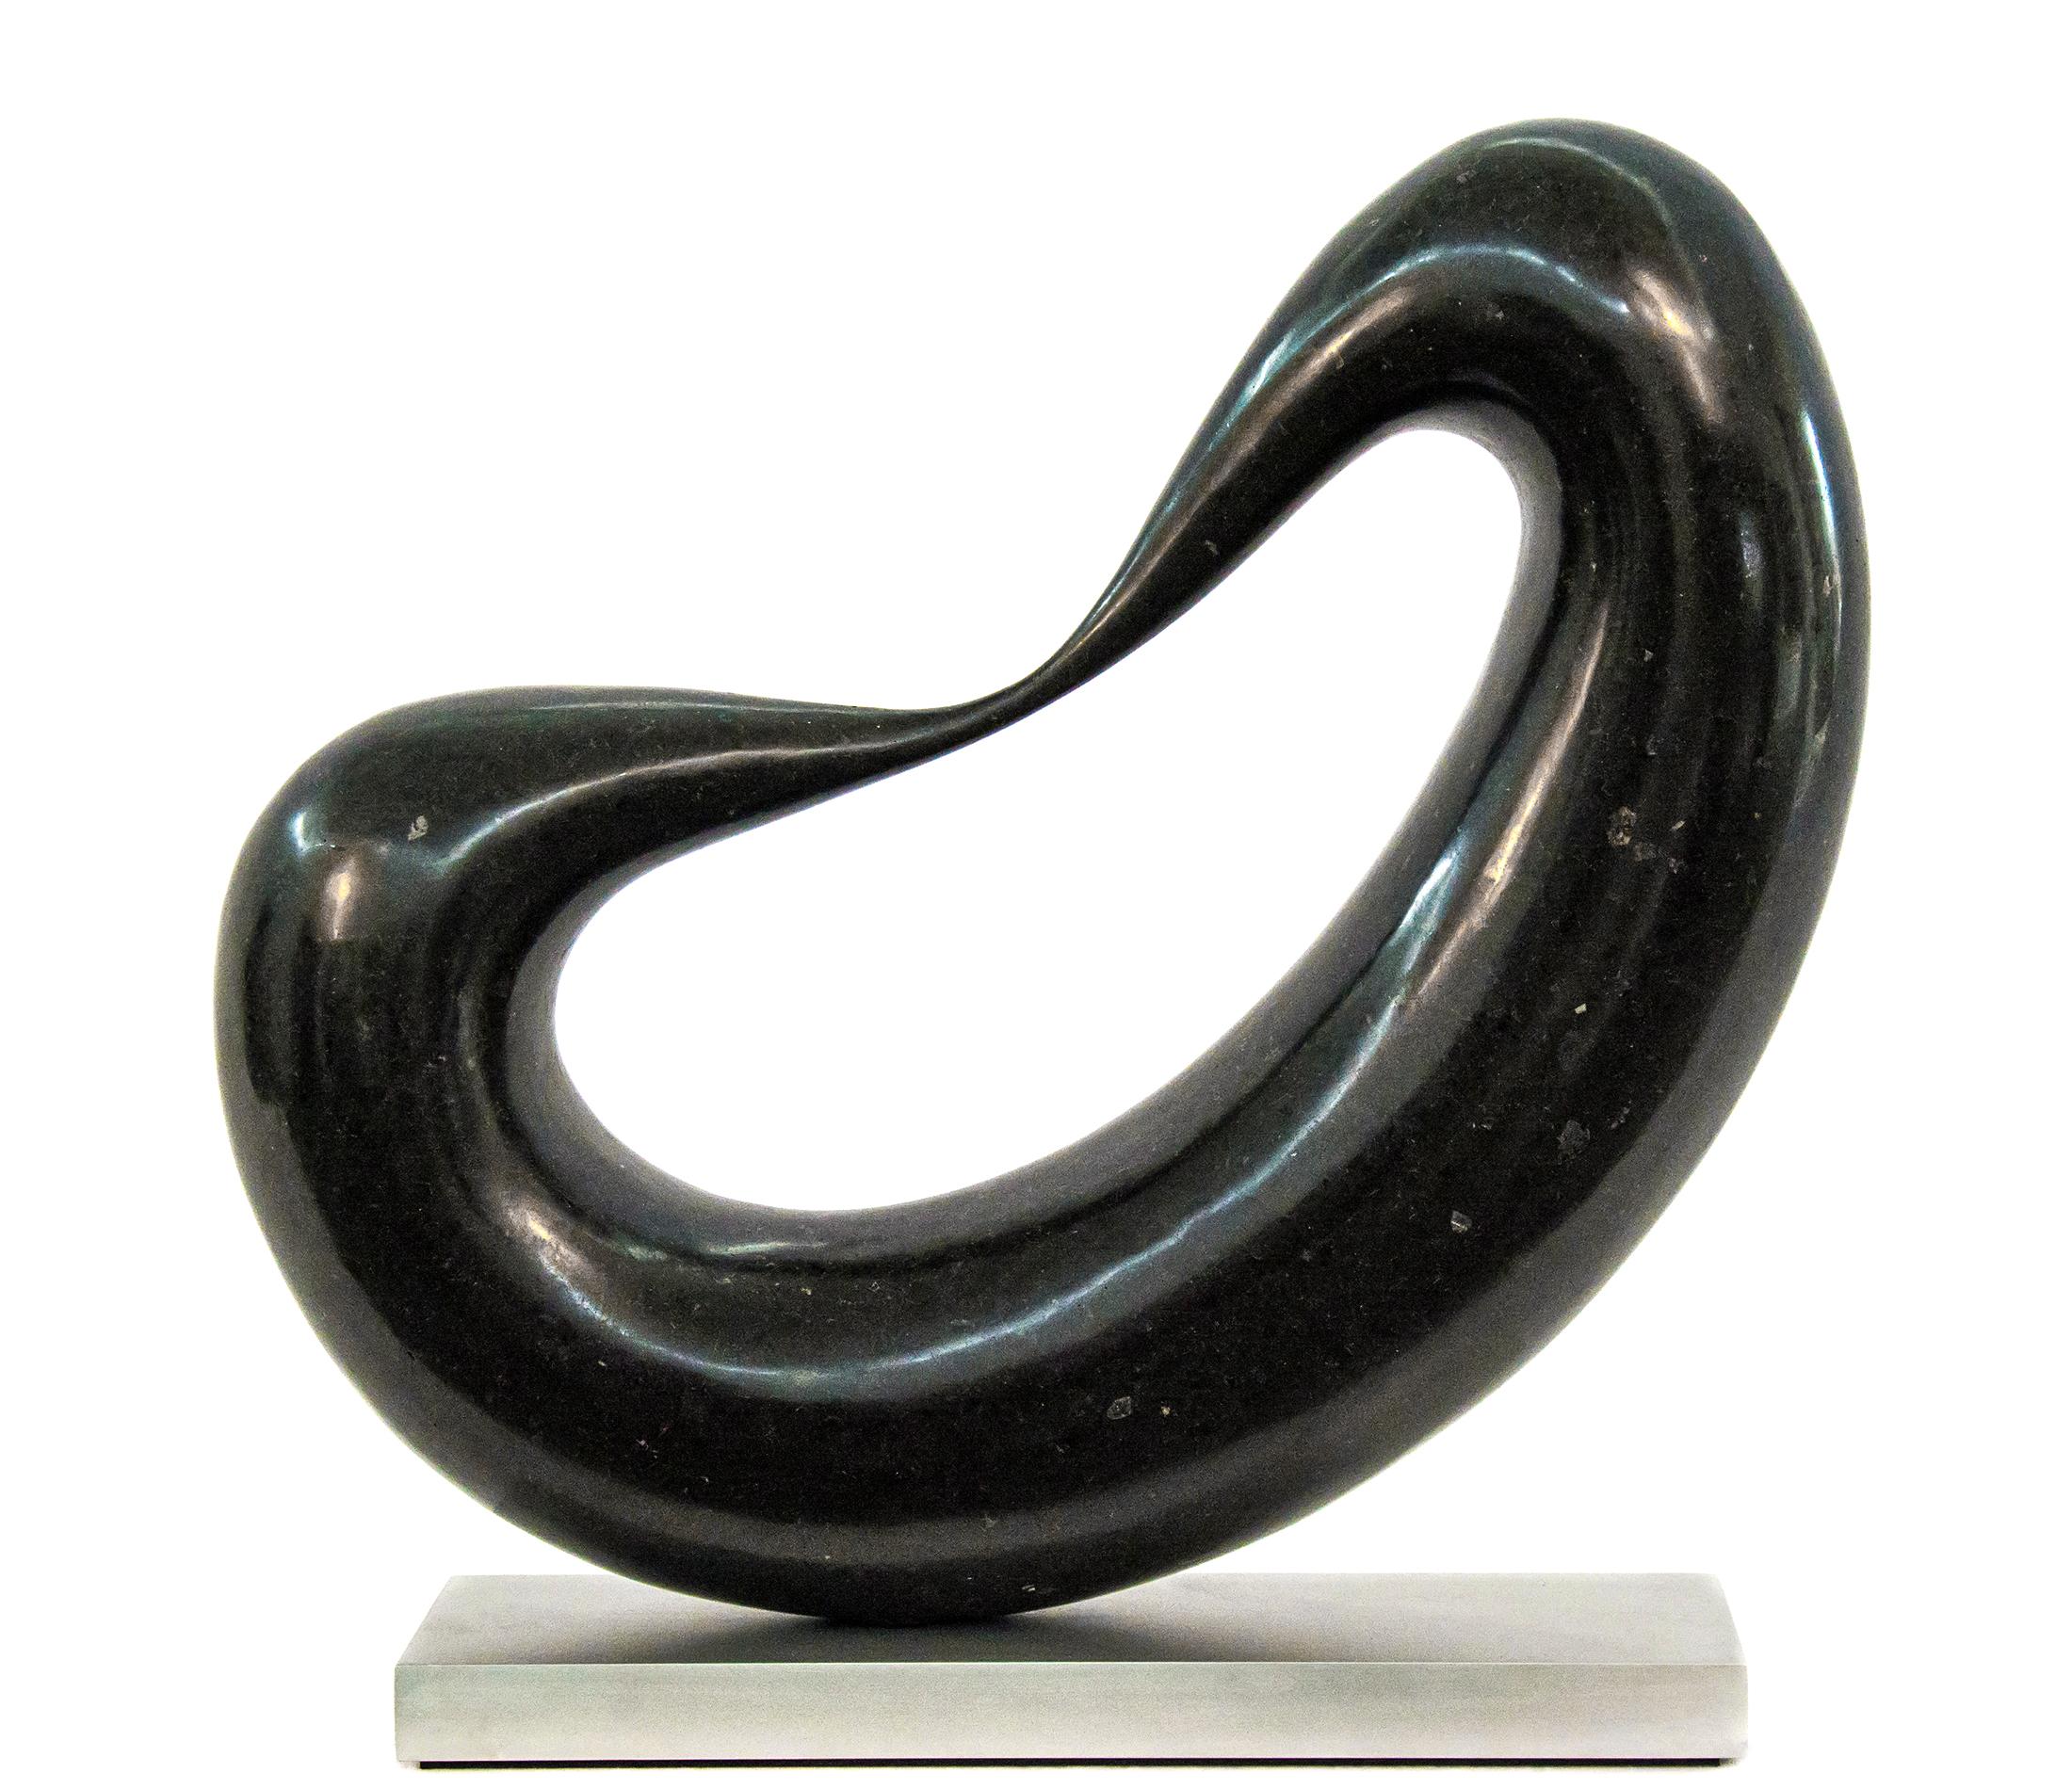 Bridge No. 3 3/50 - dark, smooth, polished, abstract, black granite sculpture - Sculpture by Jeremy Guy